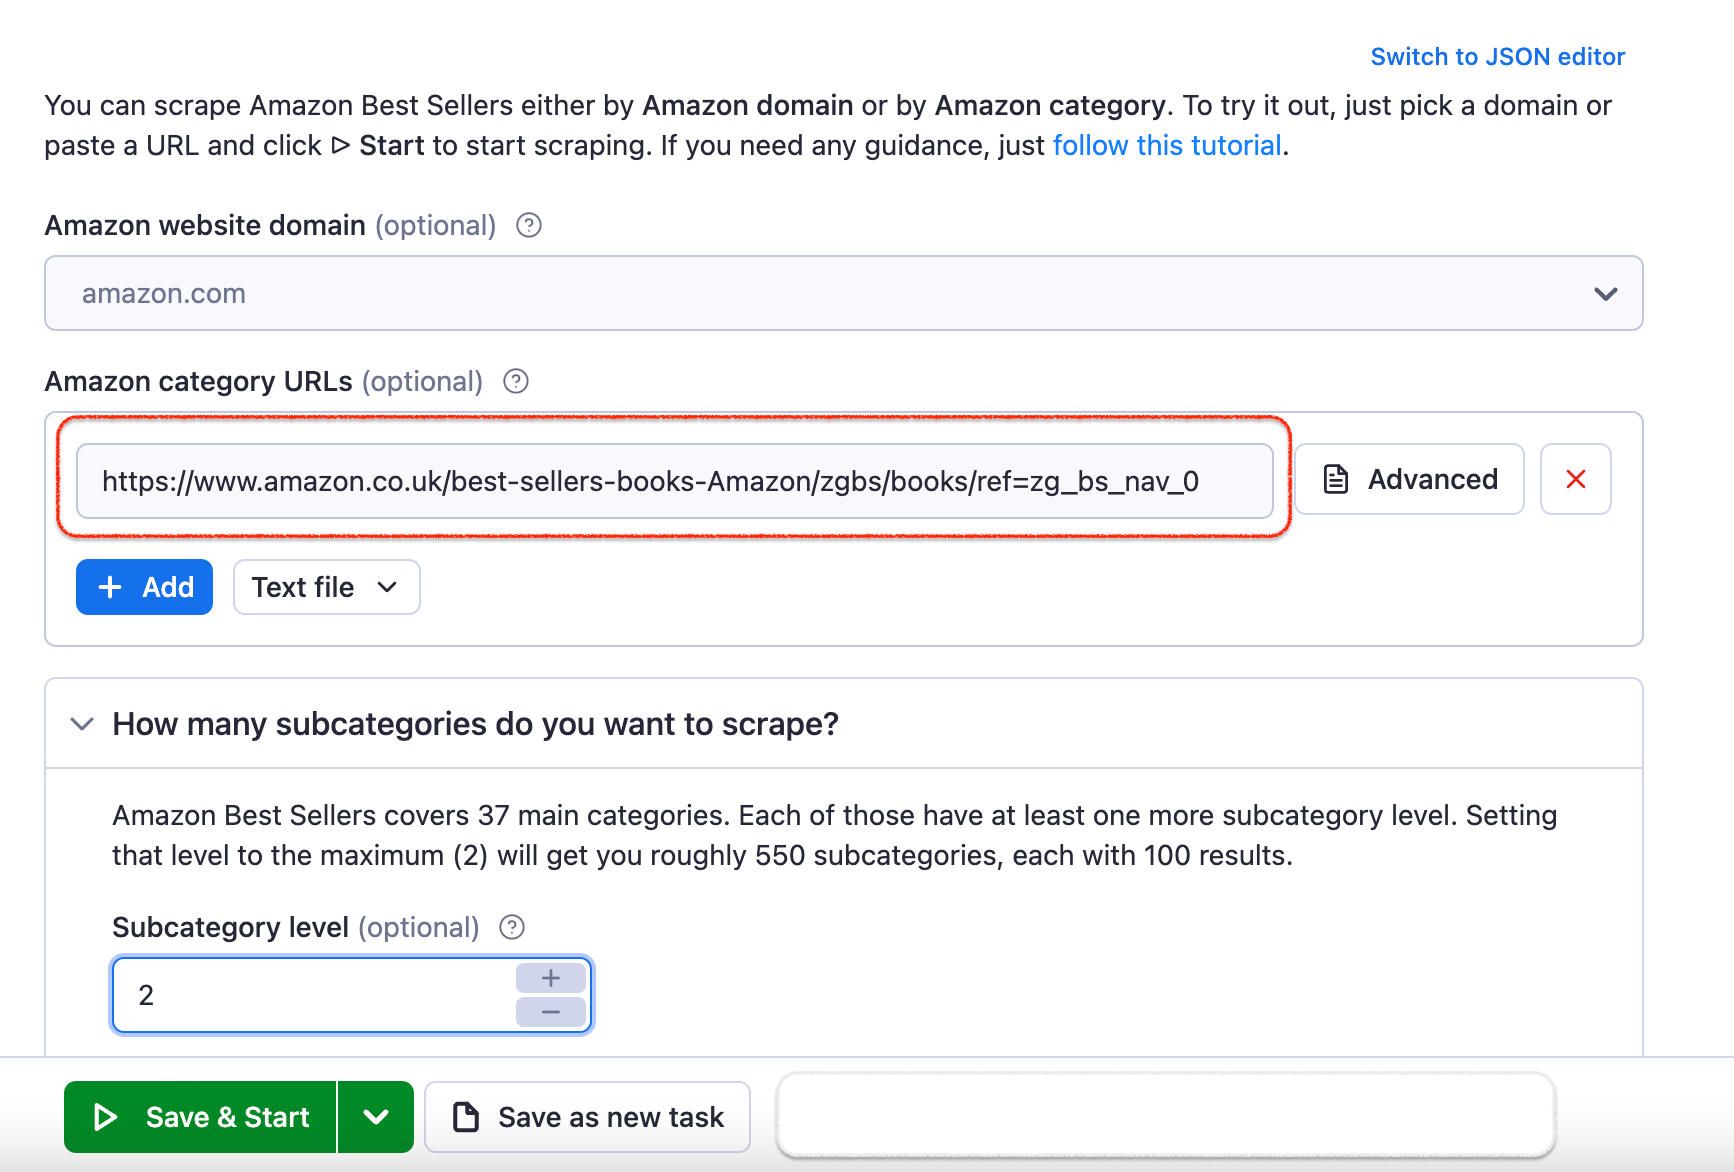 Use Amazon Best Sellers Scraper to extract product data from Amazon category URLs